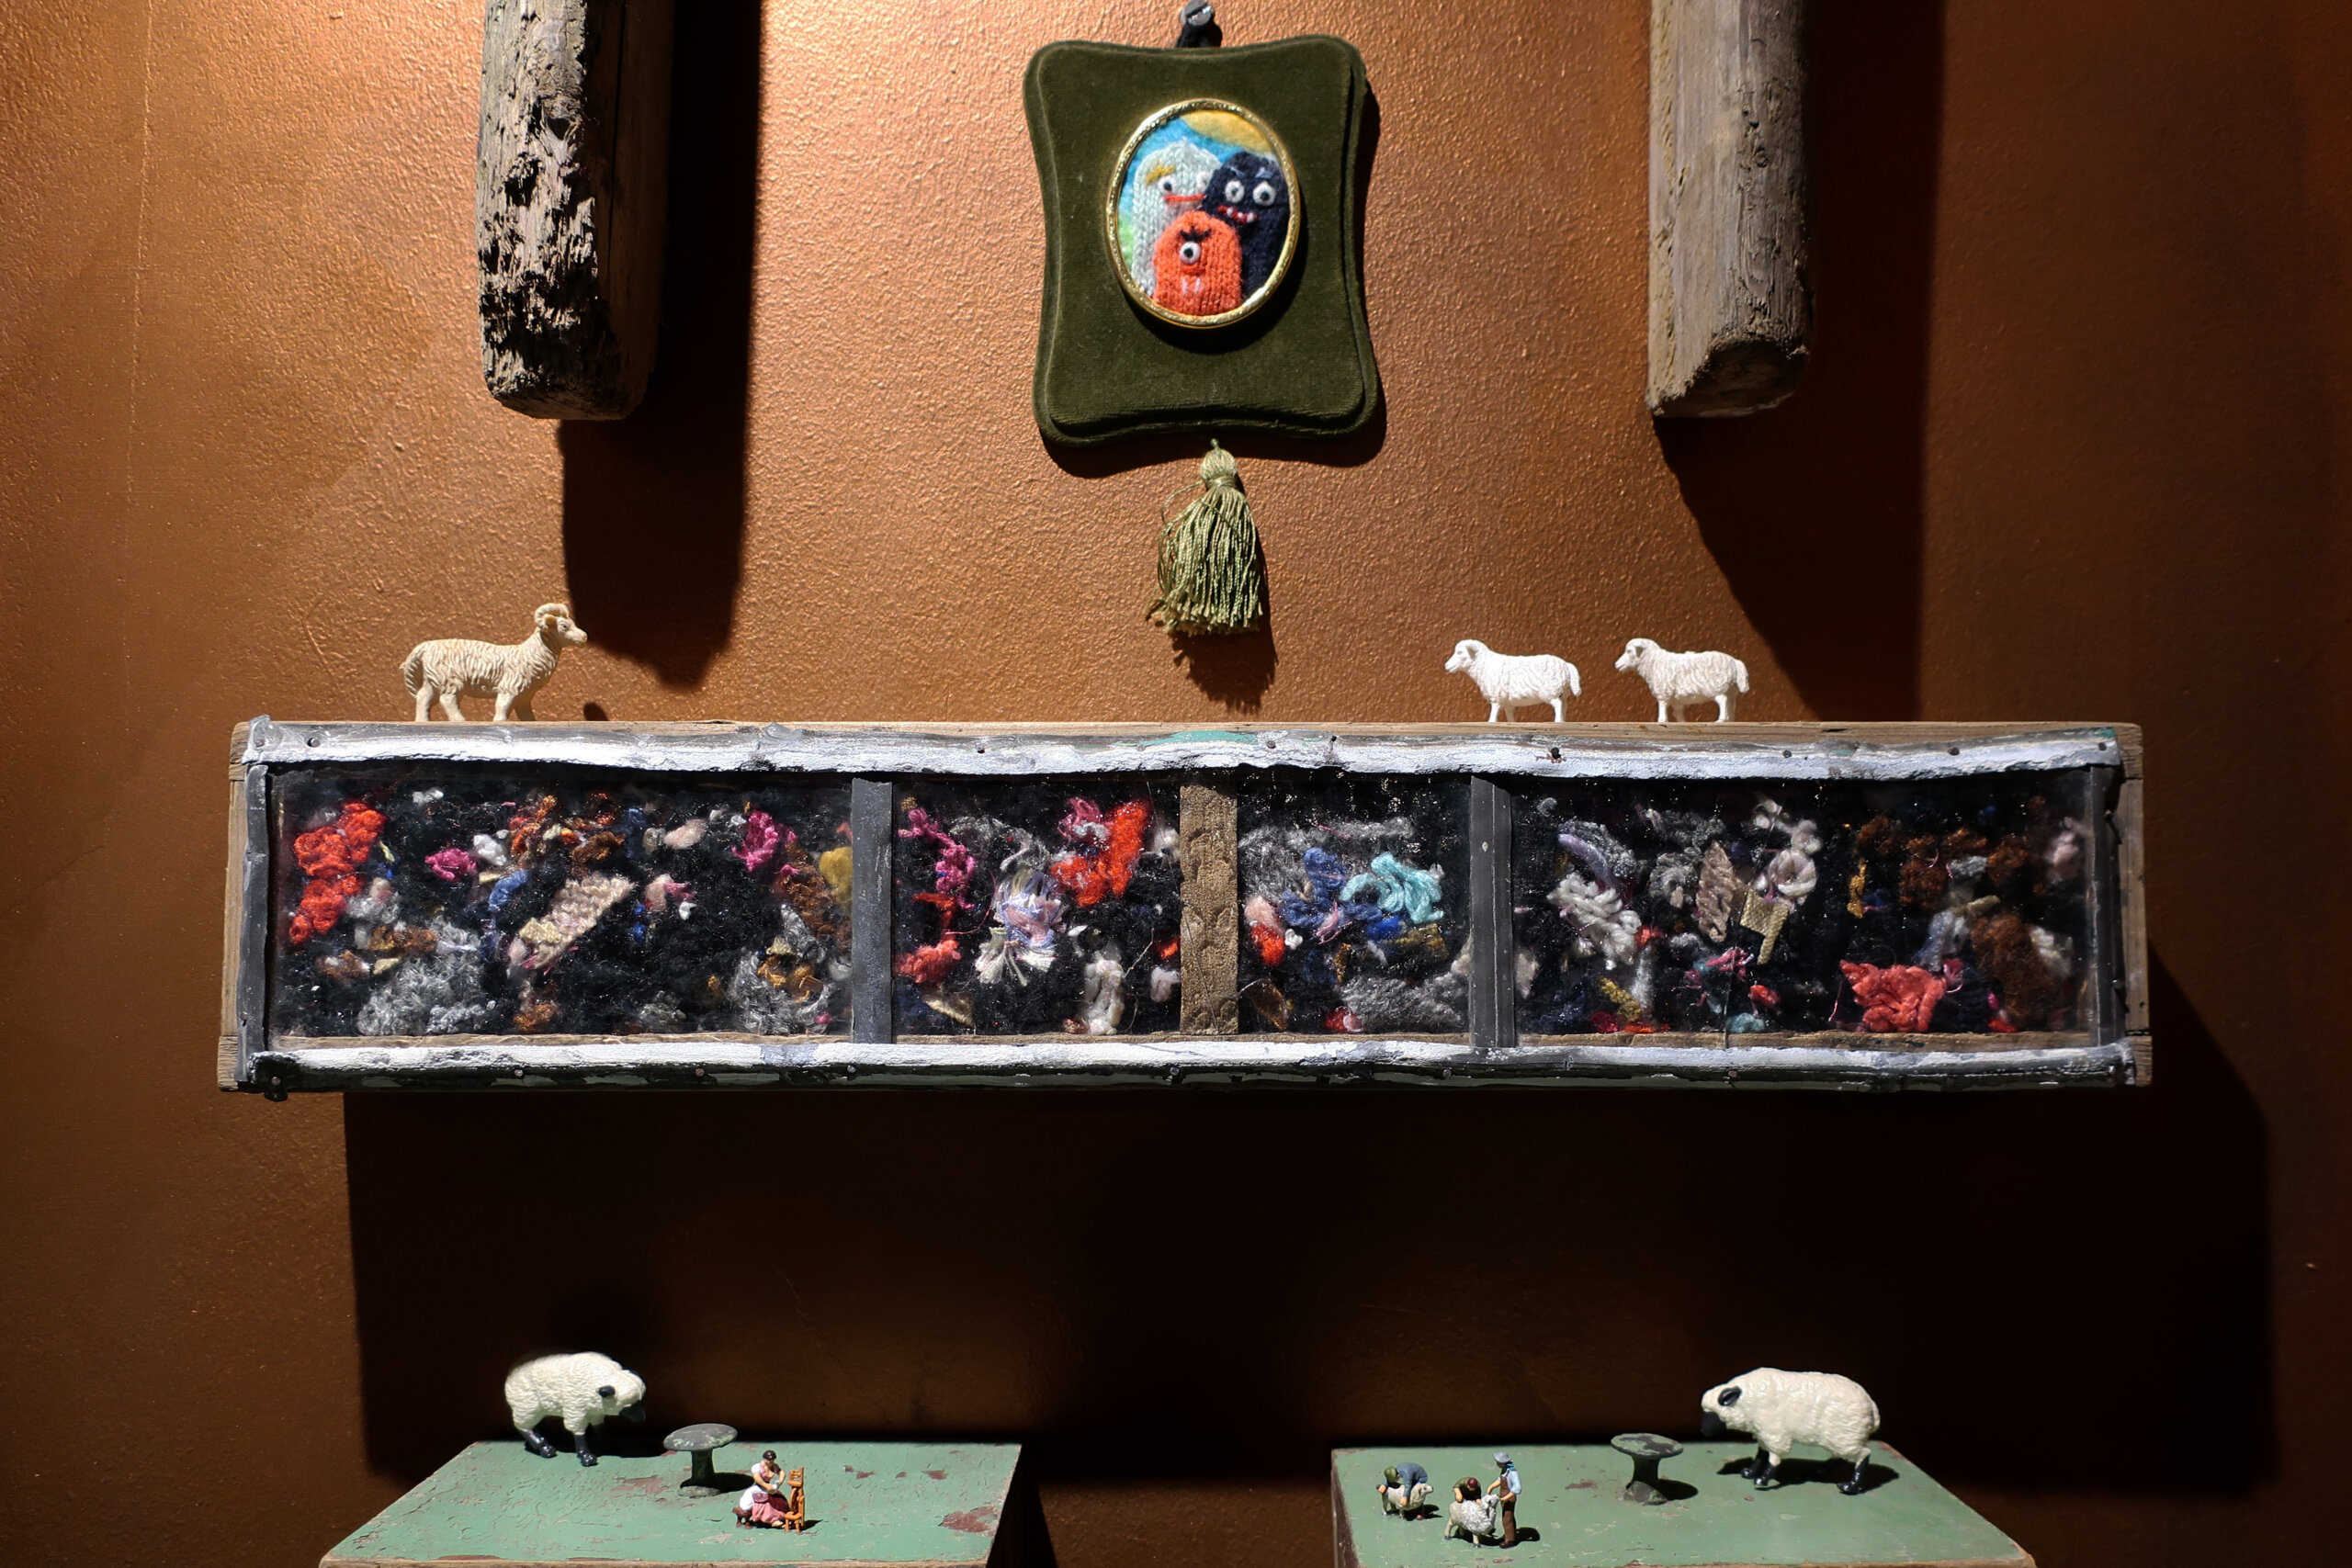 A shelf filled with wool offcuts alongside models of sheep.